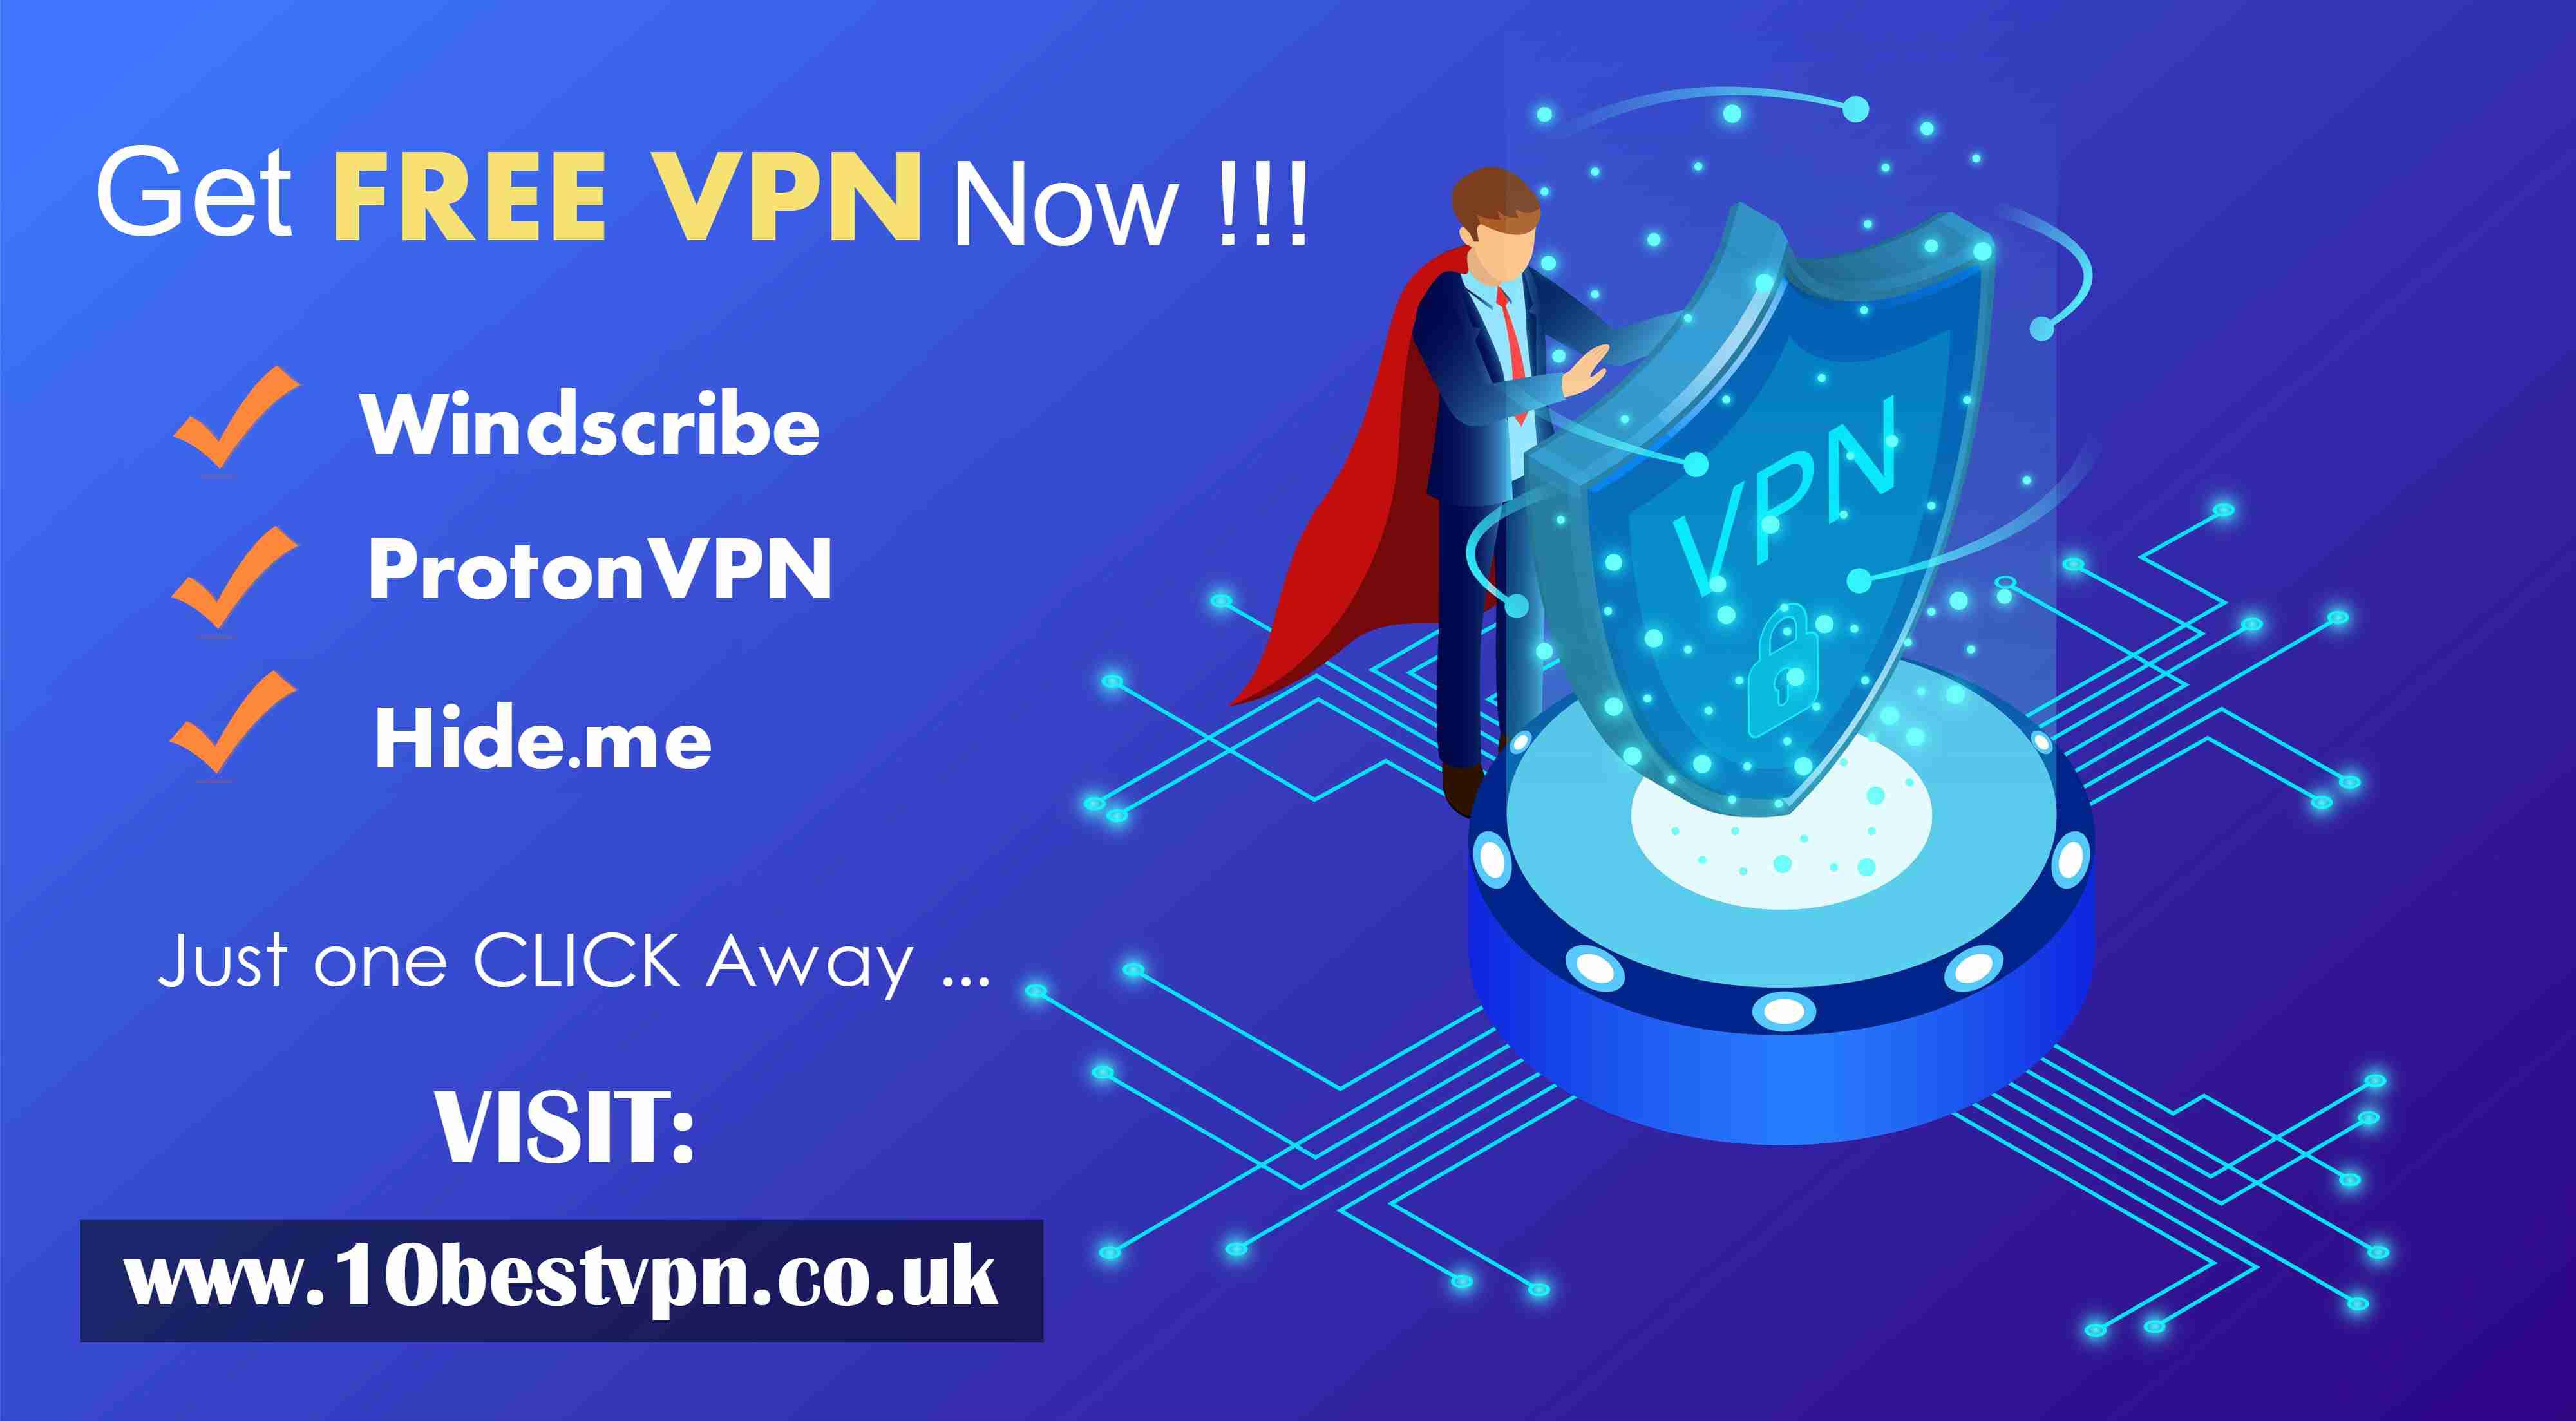 Image - 10bestVPN gives you a list of #freeVPNservices that are safe and reliable. These #FreeVPNClients are rated by...